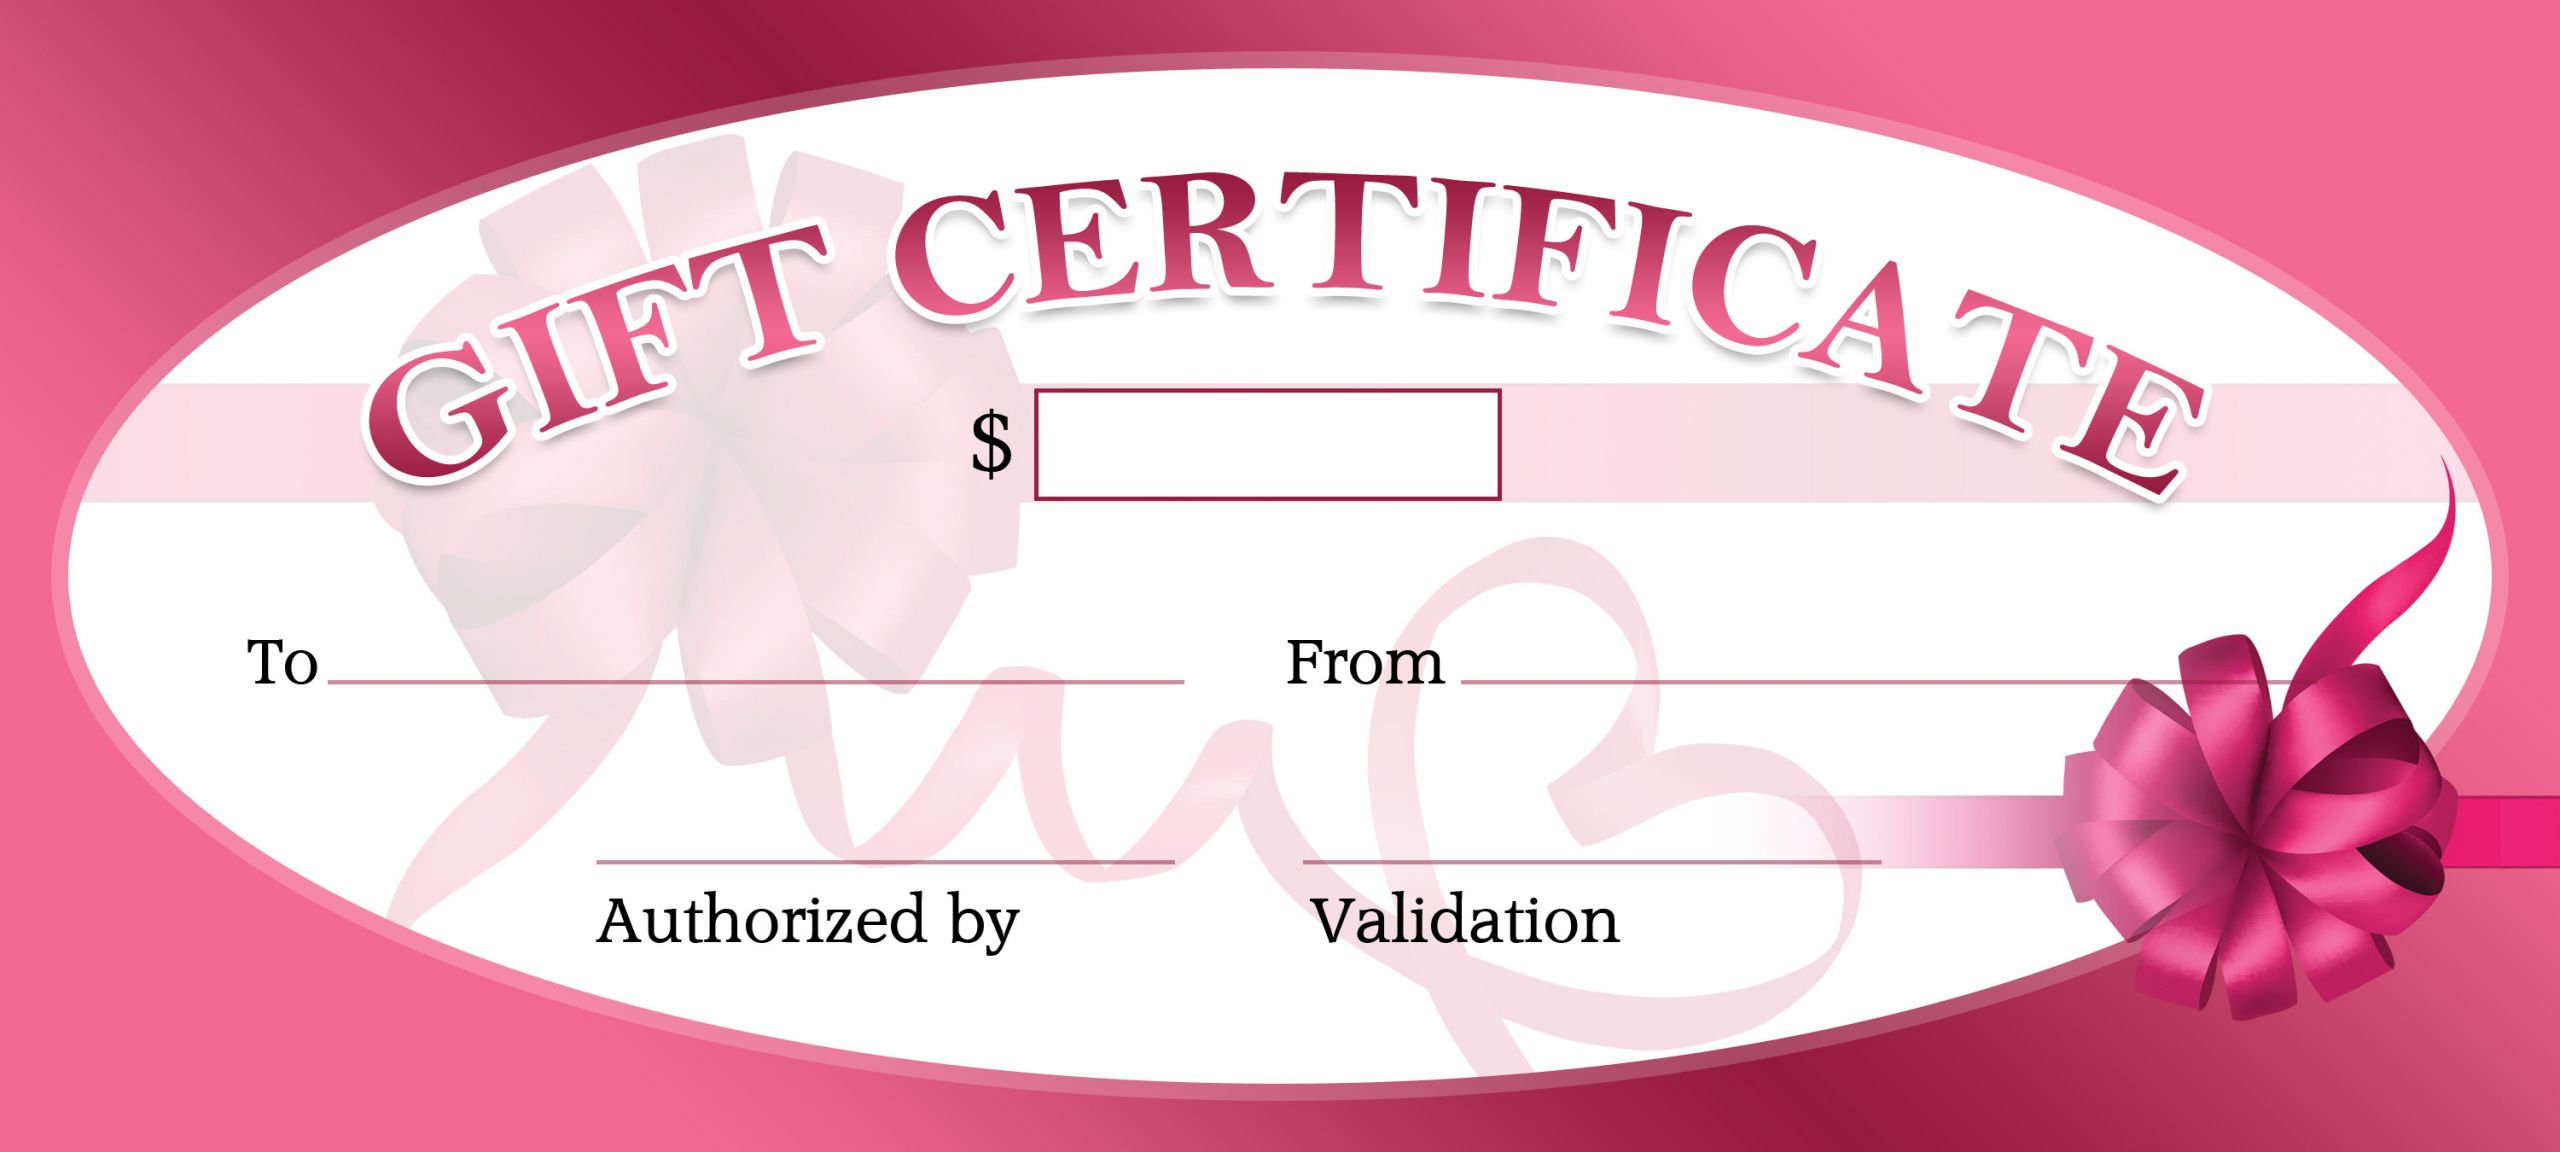 Best Gift Certificate Ideas
 Business Gift Certificates for All Events